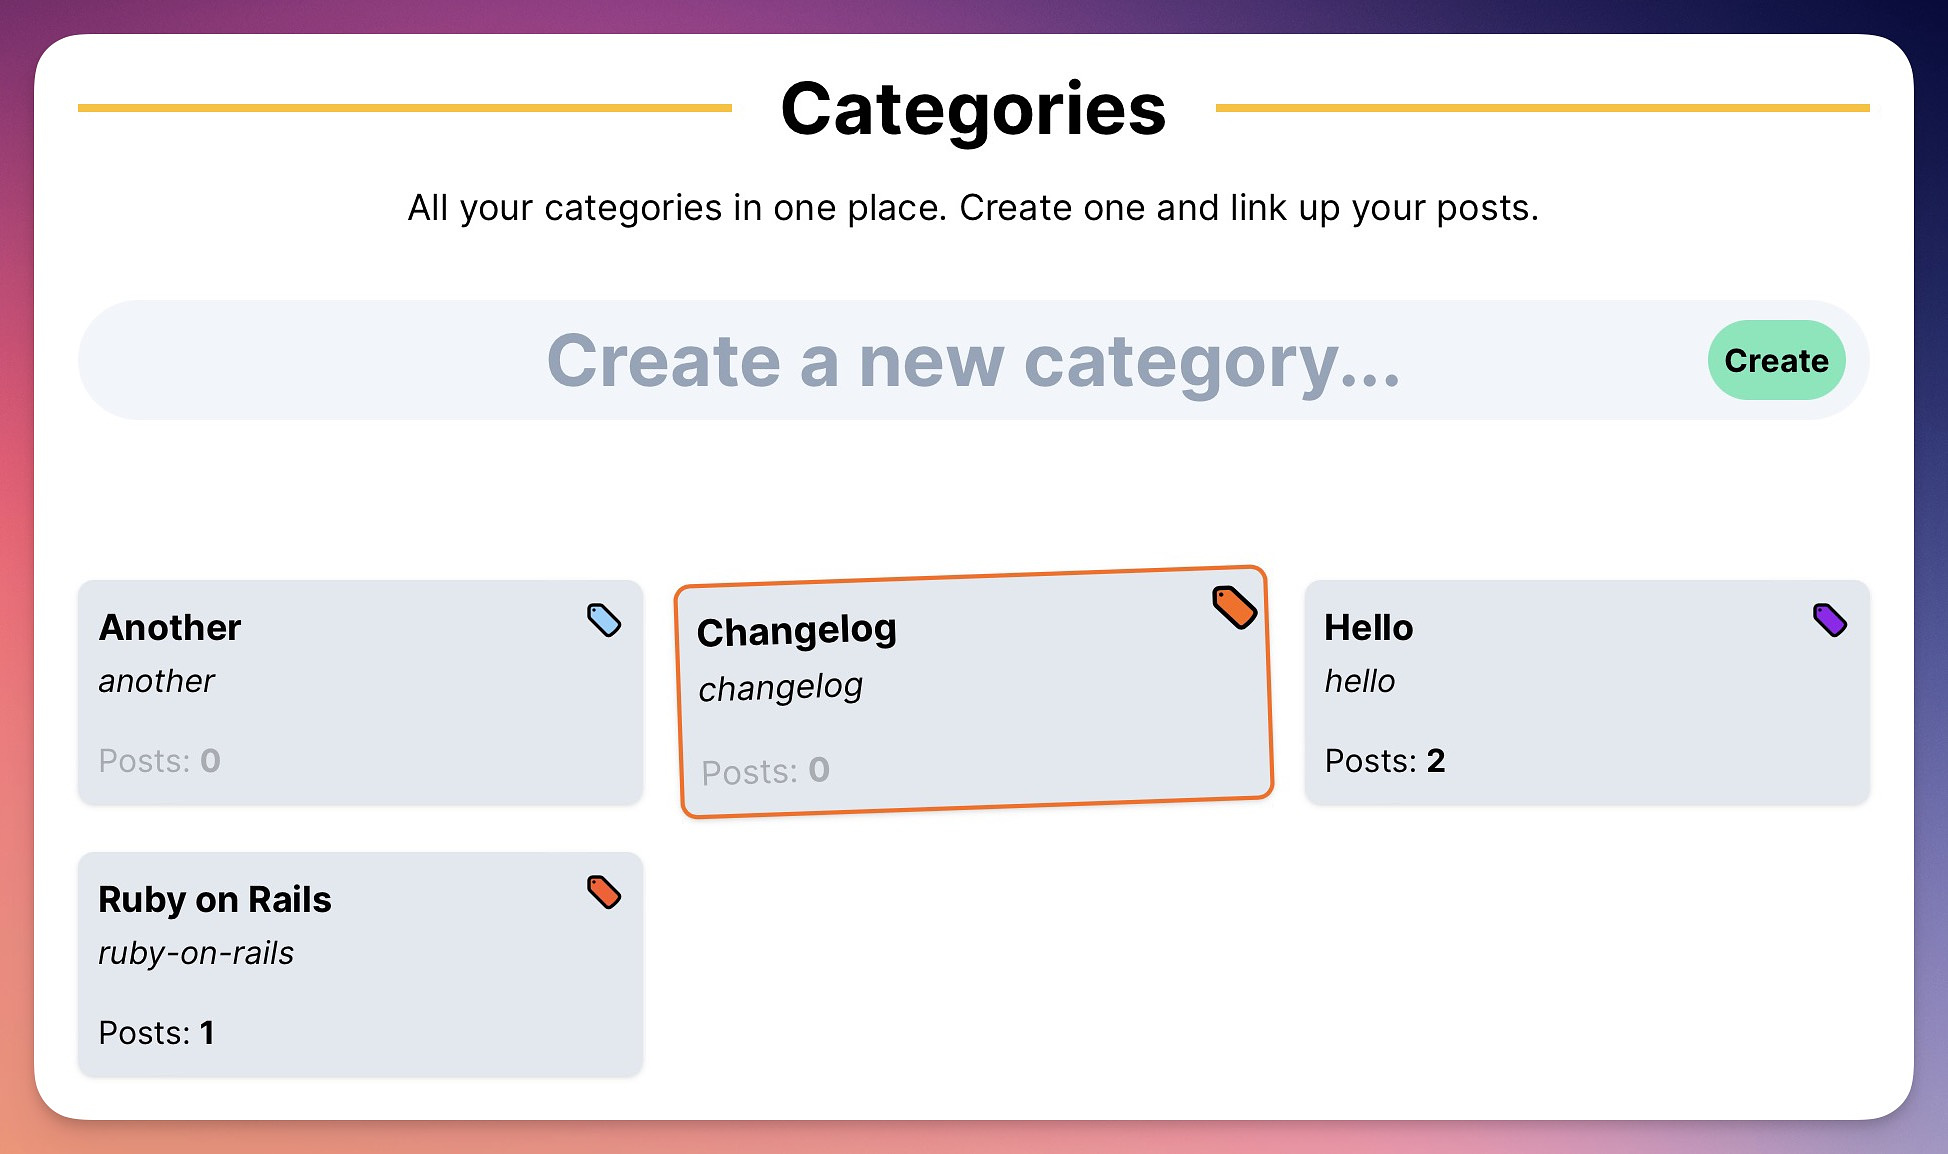 Categories shown alphabetically, with the just created one highlighted. Also includes post counts if you've added posts to the category.